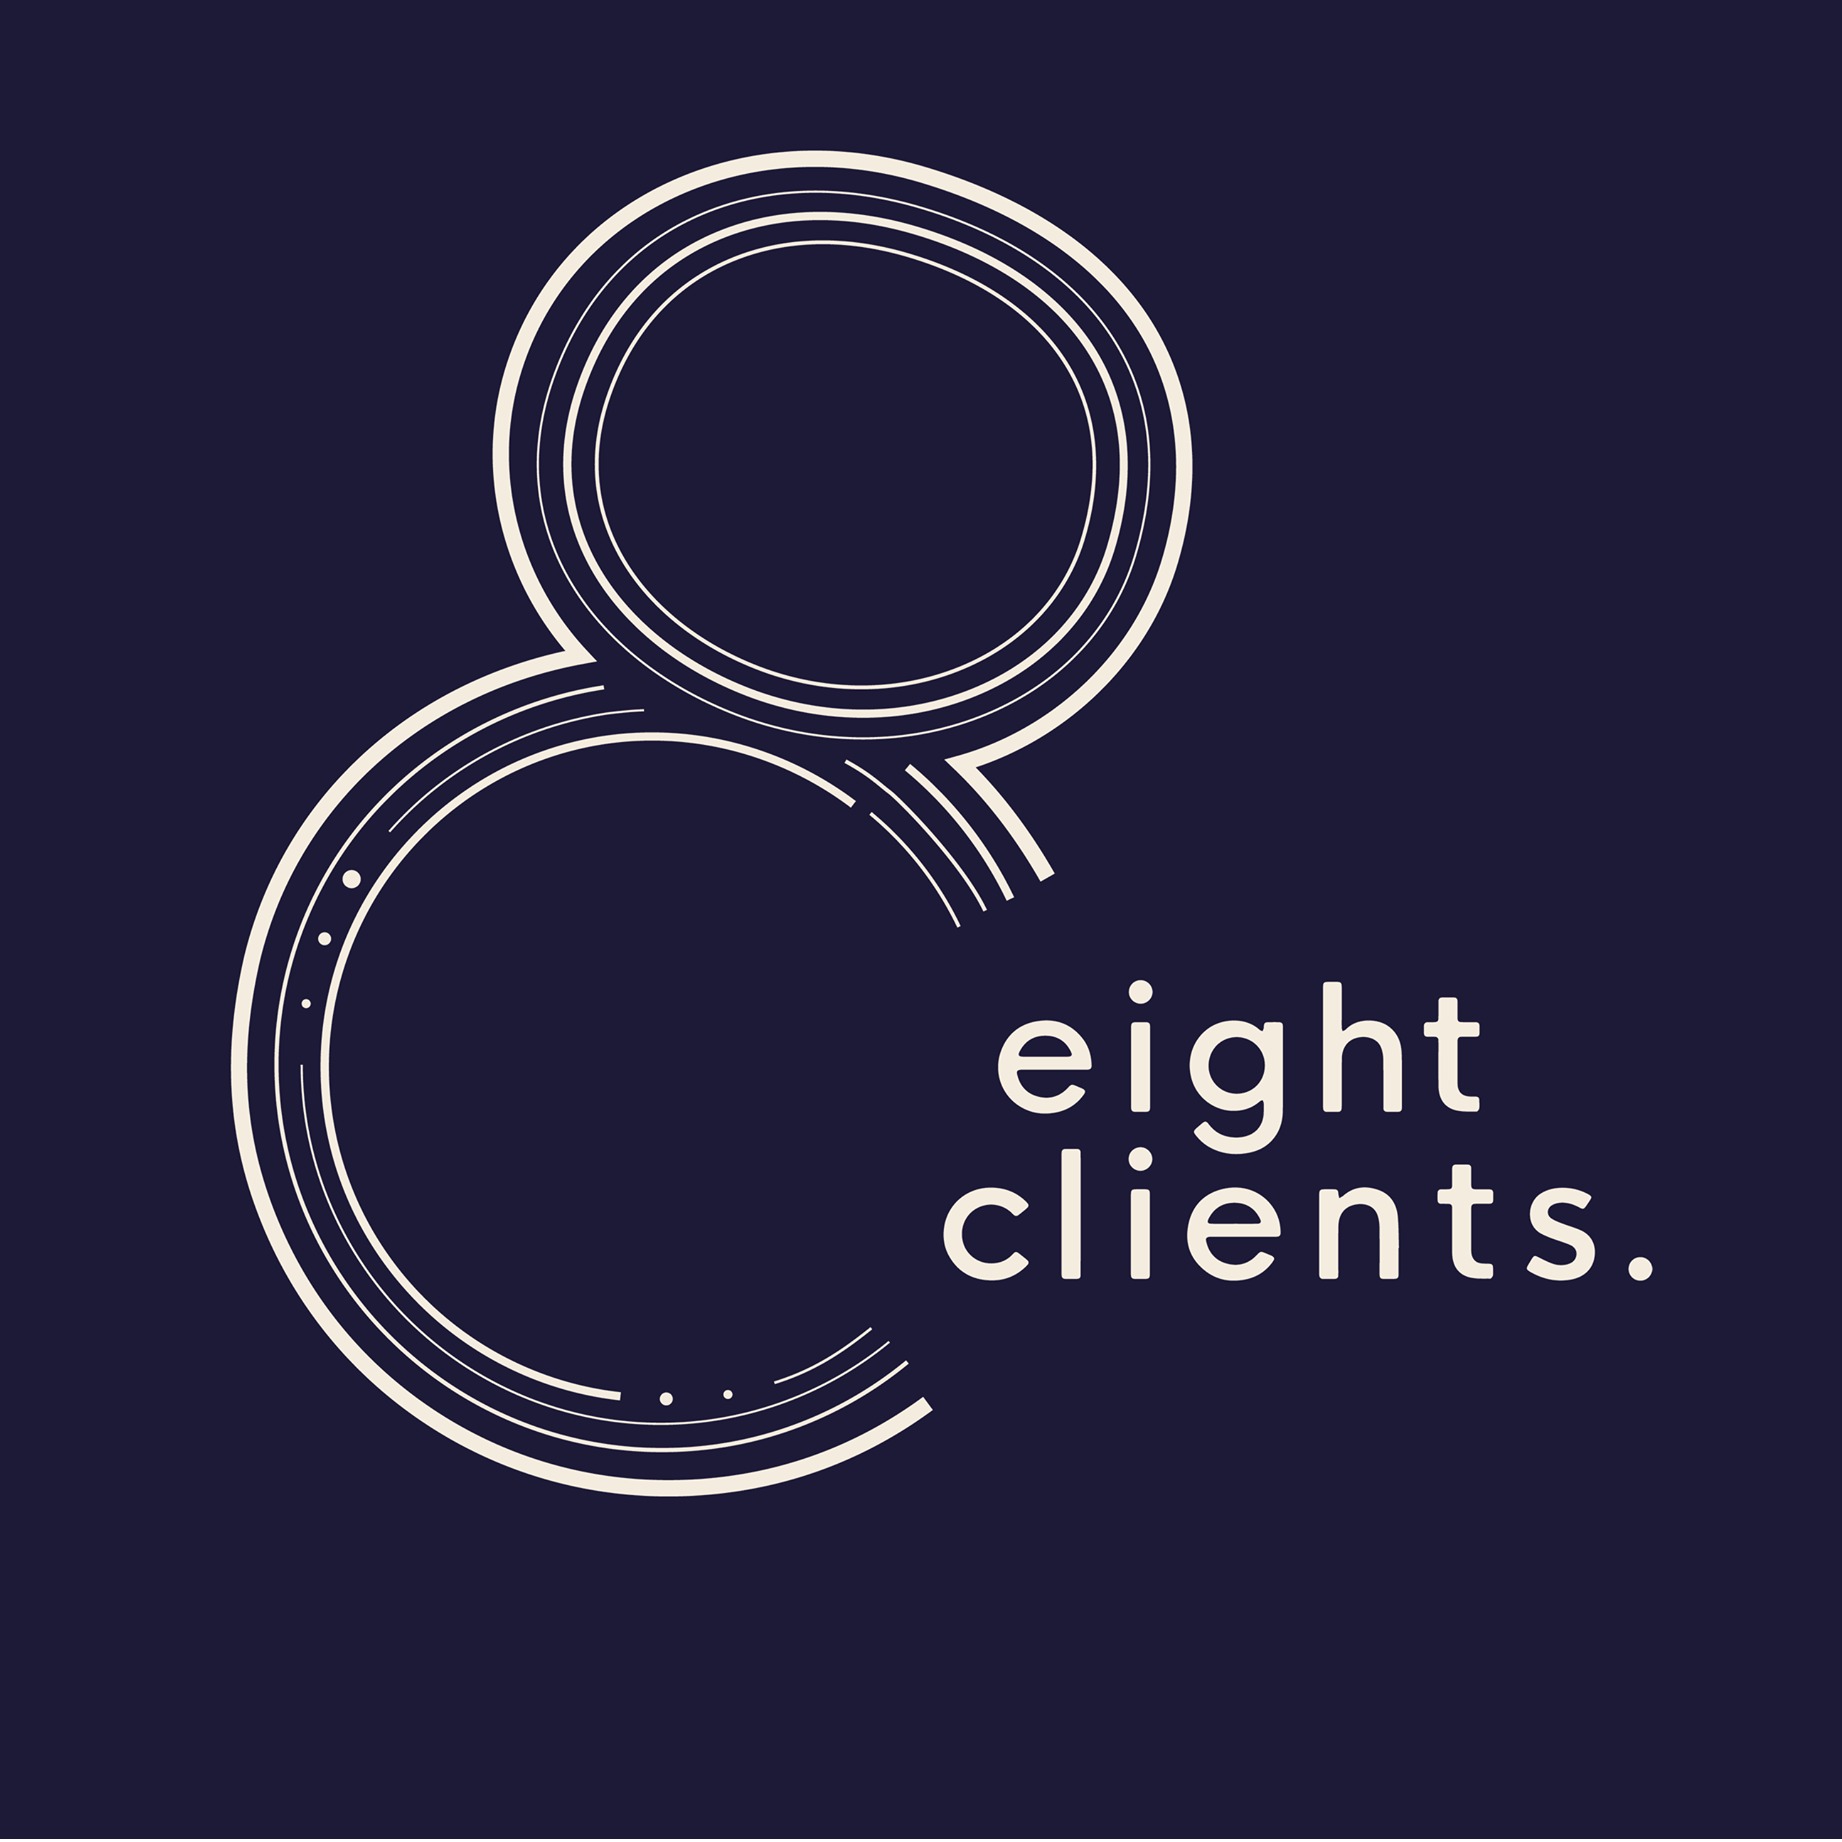 Eight Clients Logo